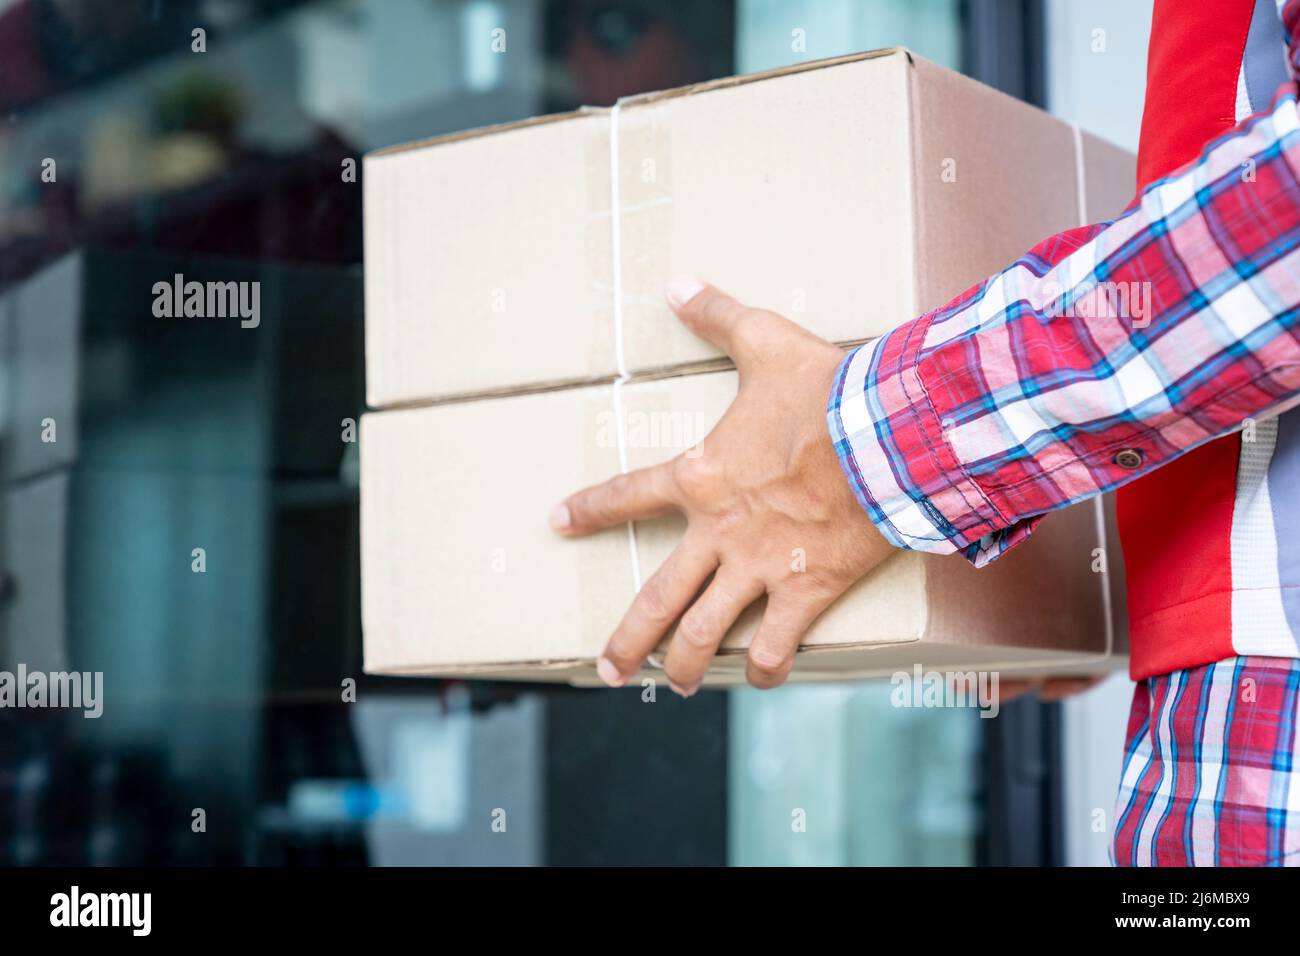 Delivery man sending parcels box to customer, A person wearing an Red ...